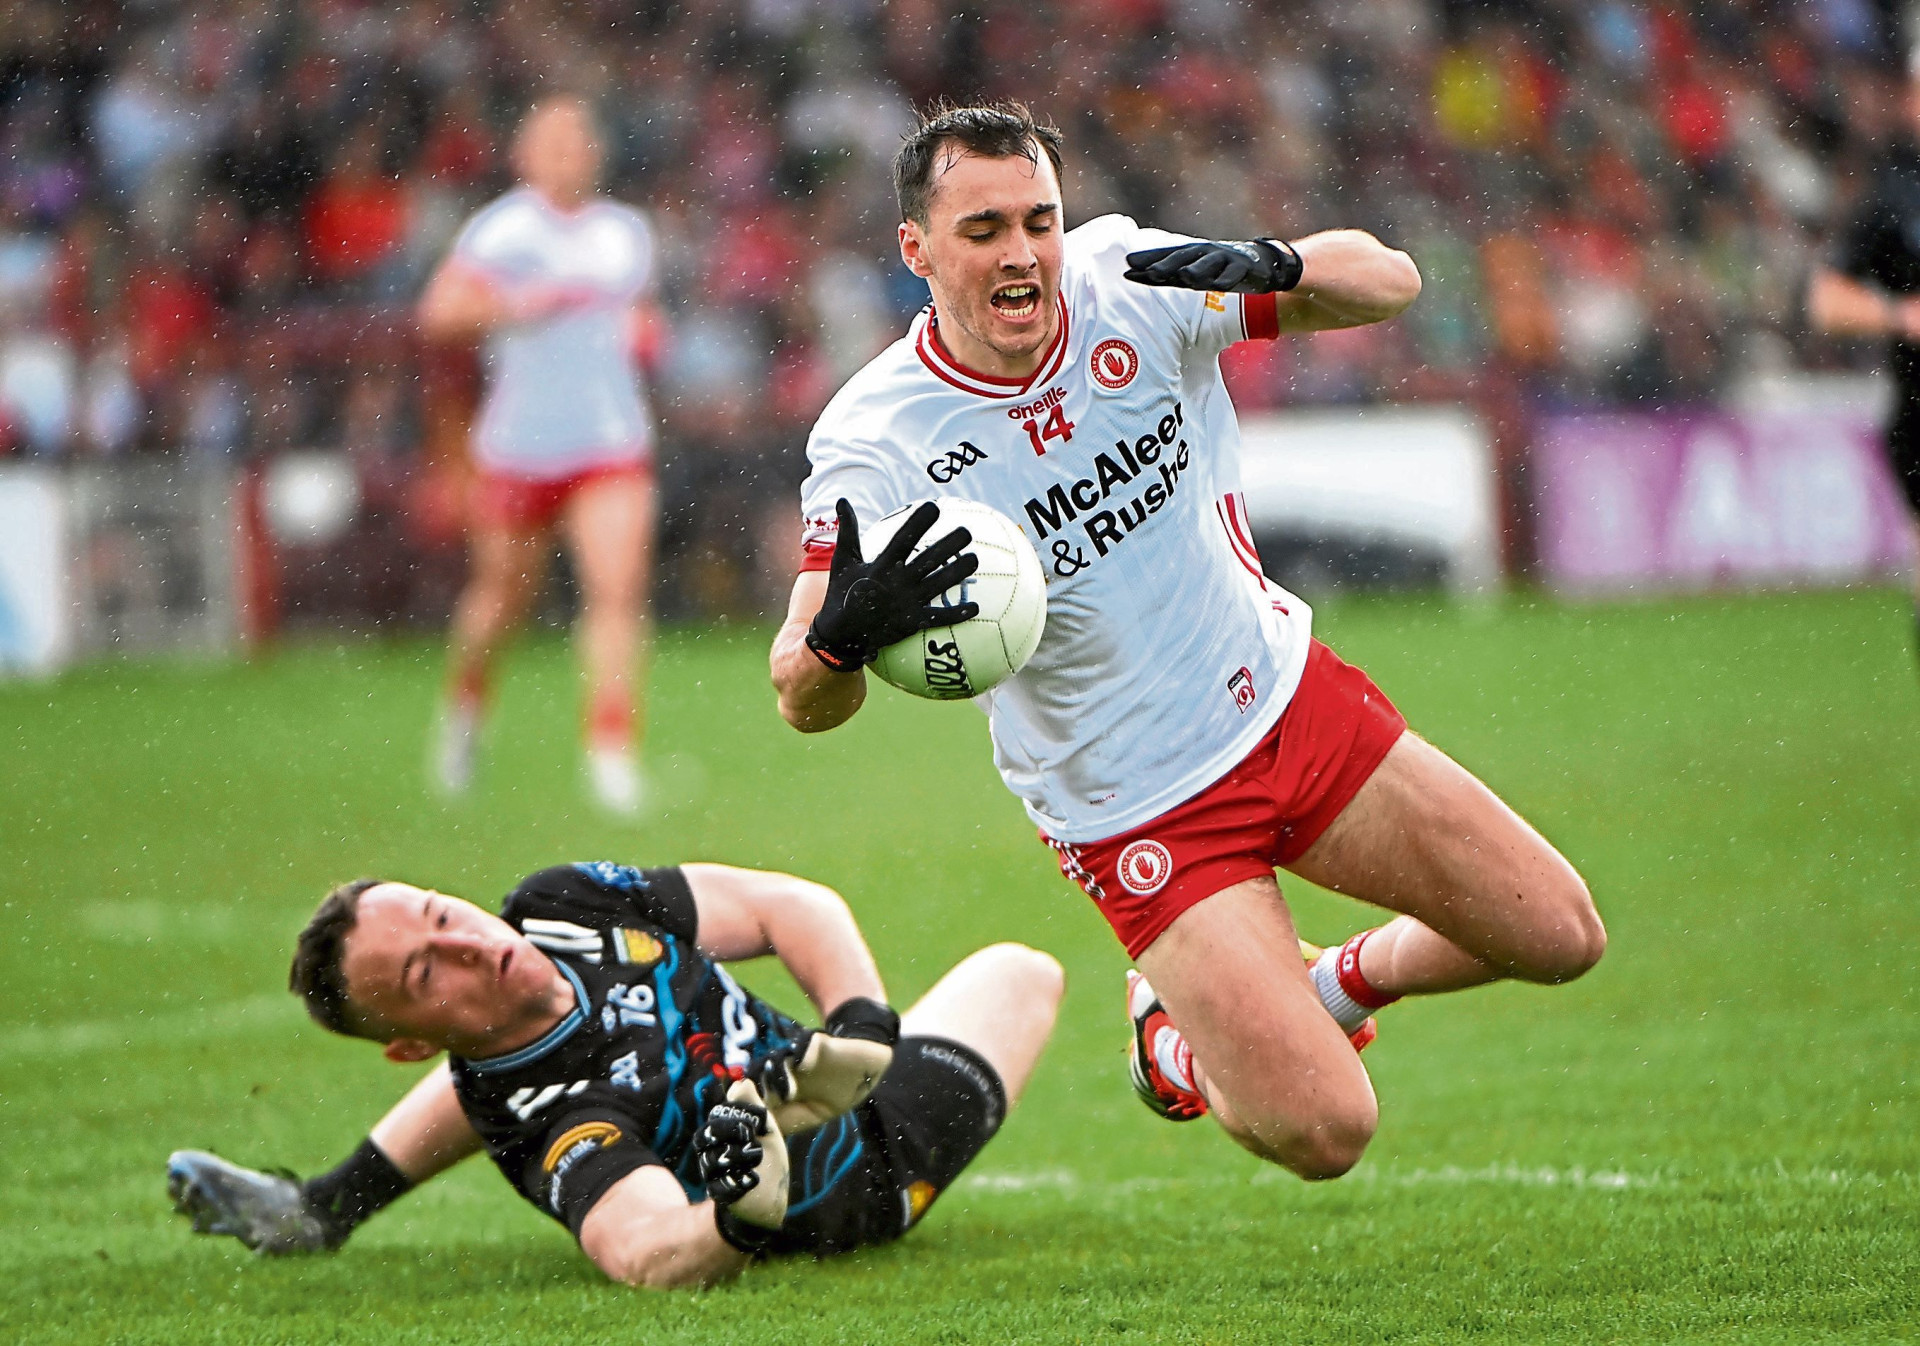 Tyrone will take on Ulster Champions in first group stage match